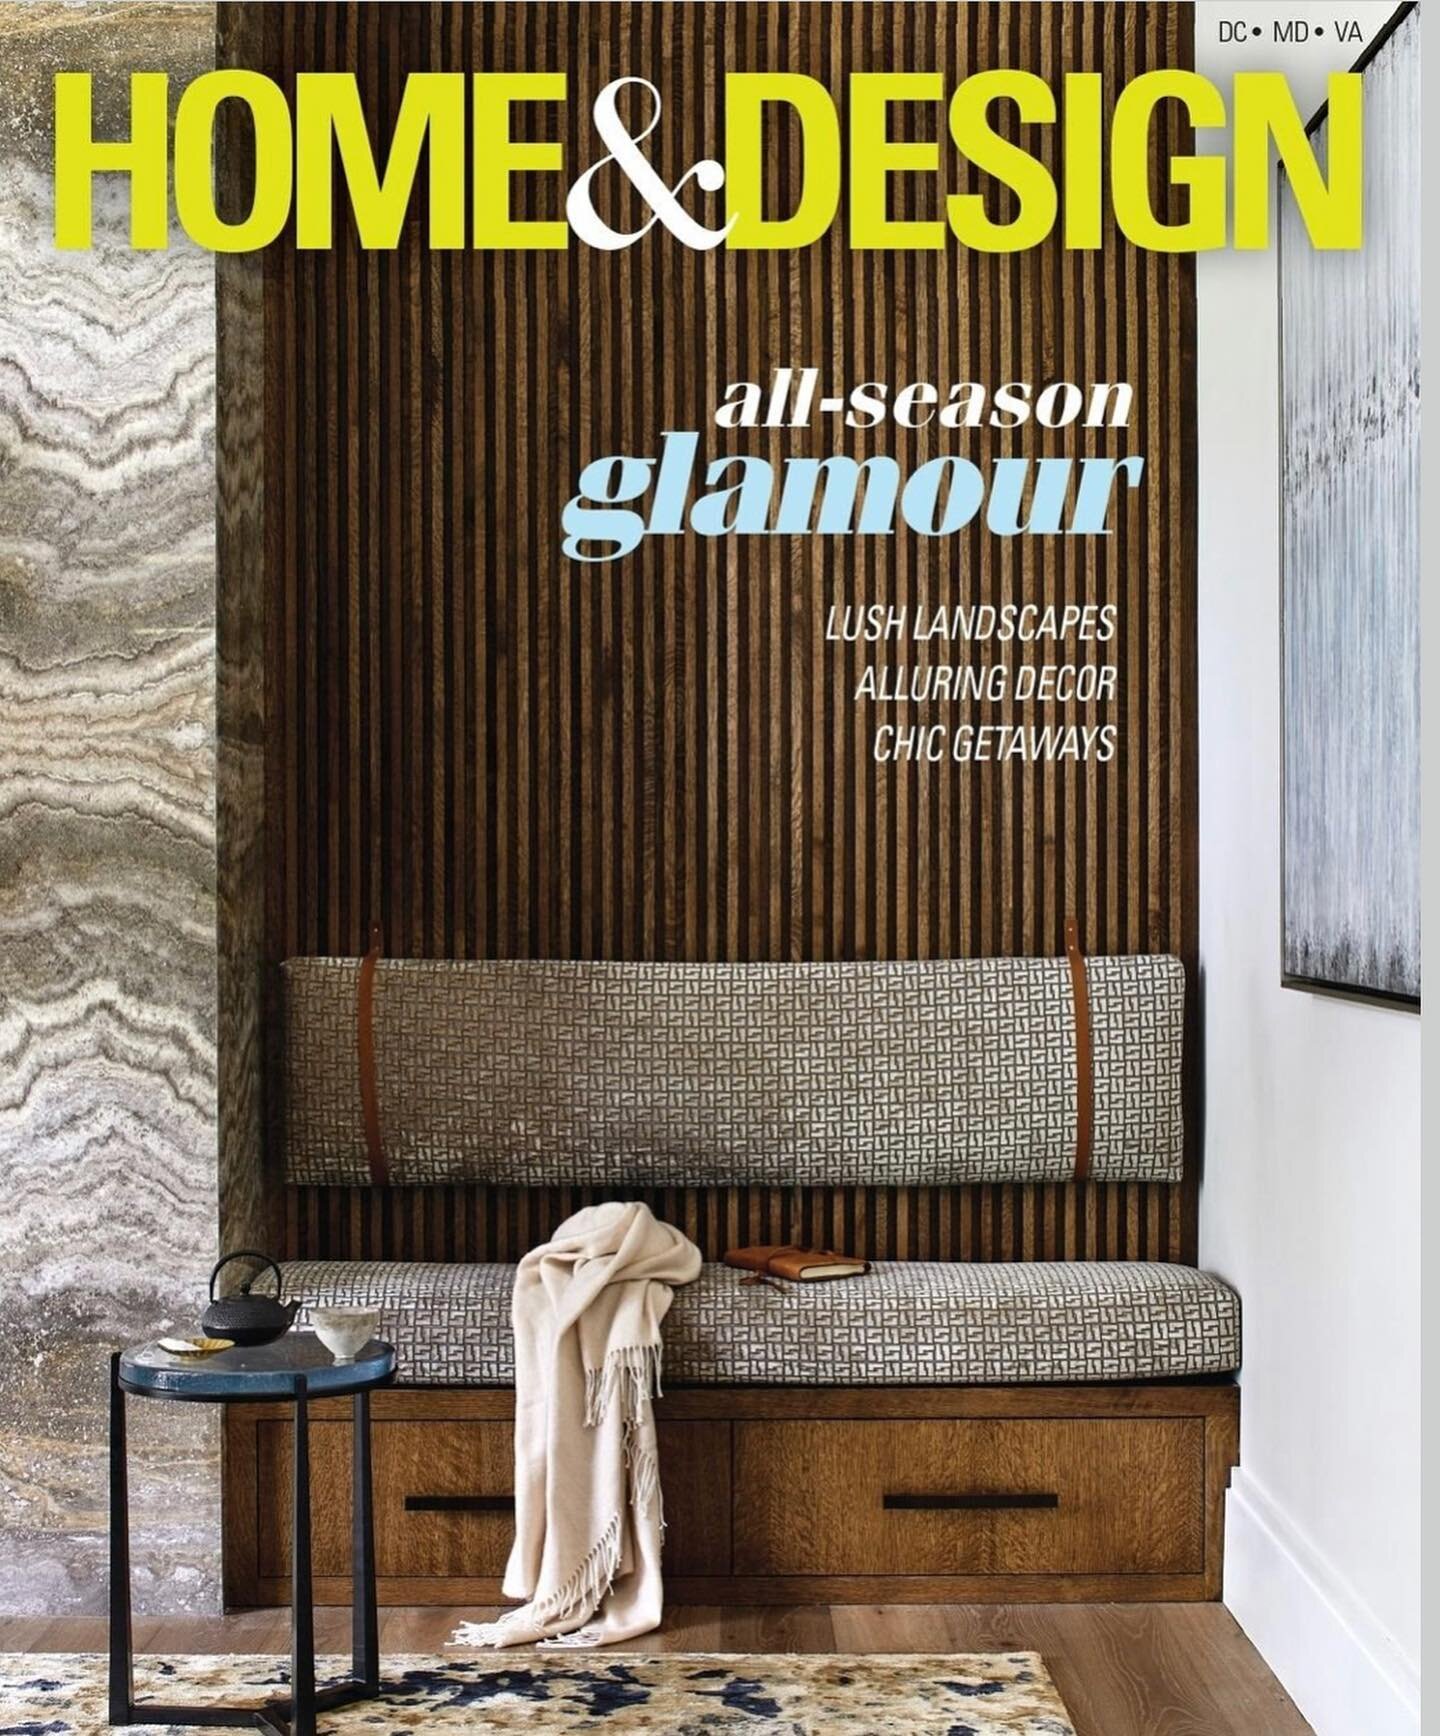 &ldquo;All Season Glamour&rdquo; at Home &amp; Design magazine March/April 2022 issue, now on newsstands!@homeanddesigndc
&bull;
&bull;
We are #beyondthrilled to be included on the #guestlist! Swipe to view the #gorgeous photos by @stacyzaringoldberg